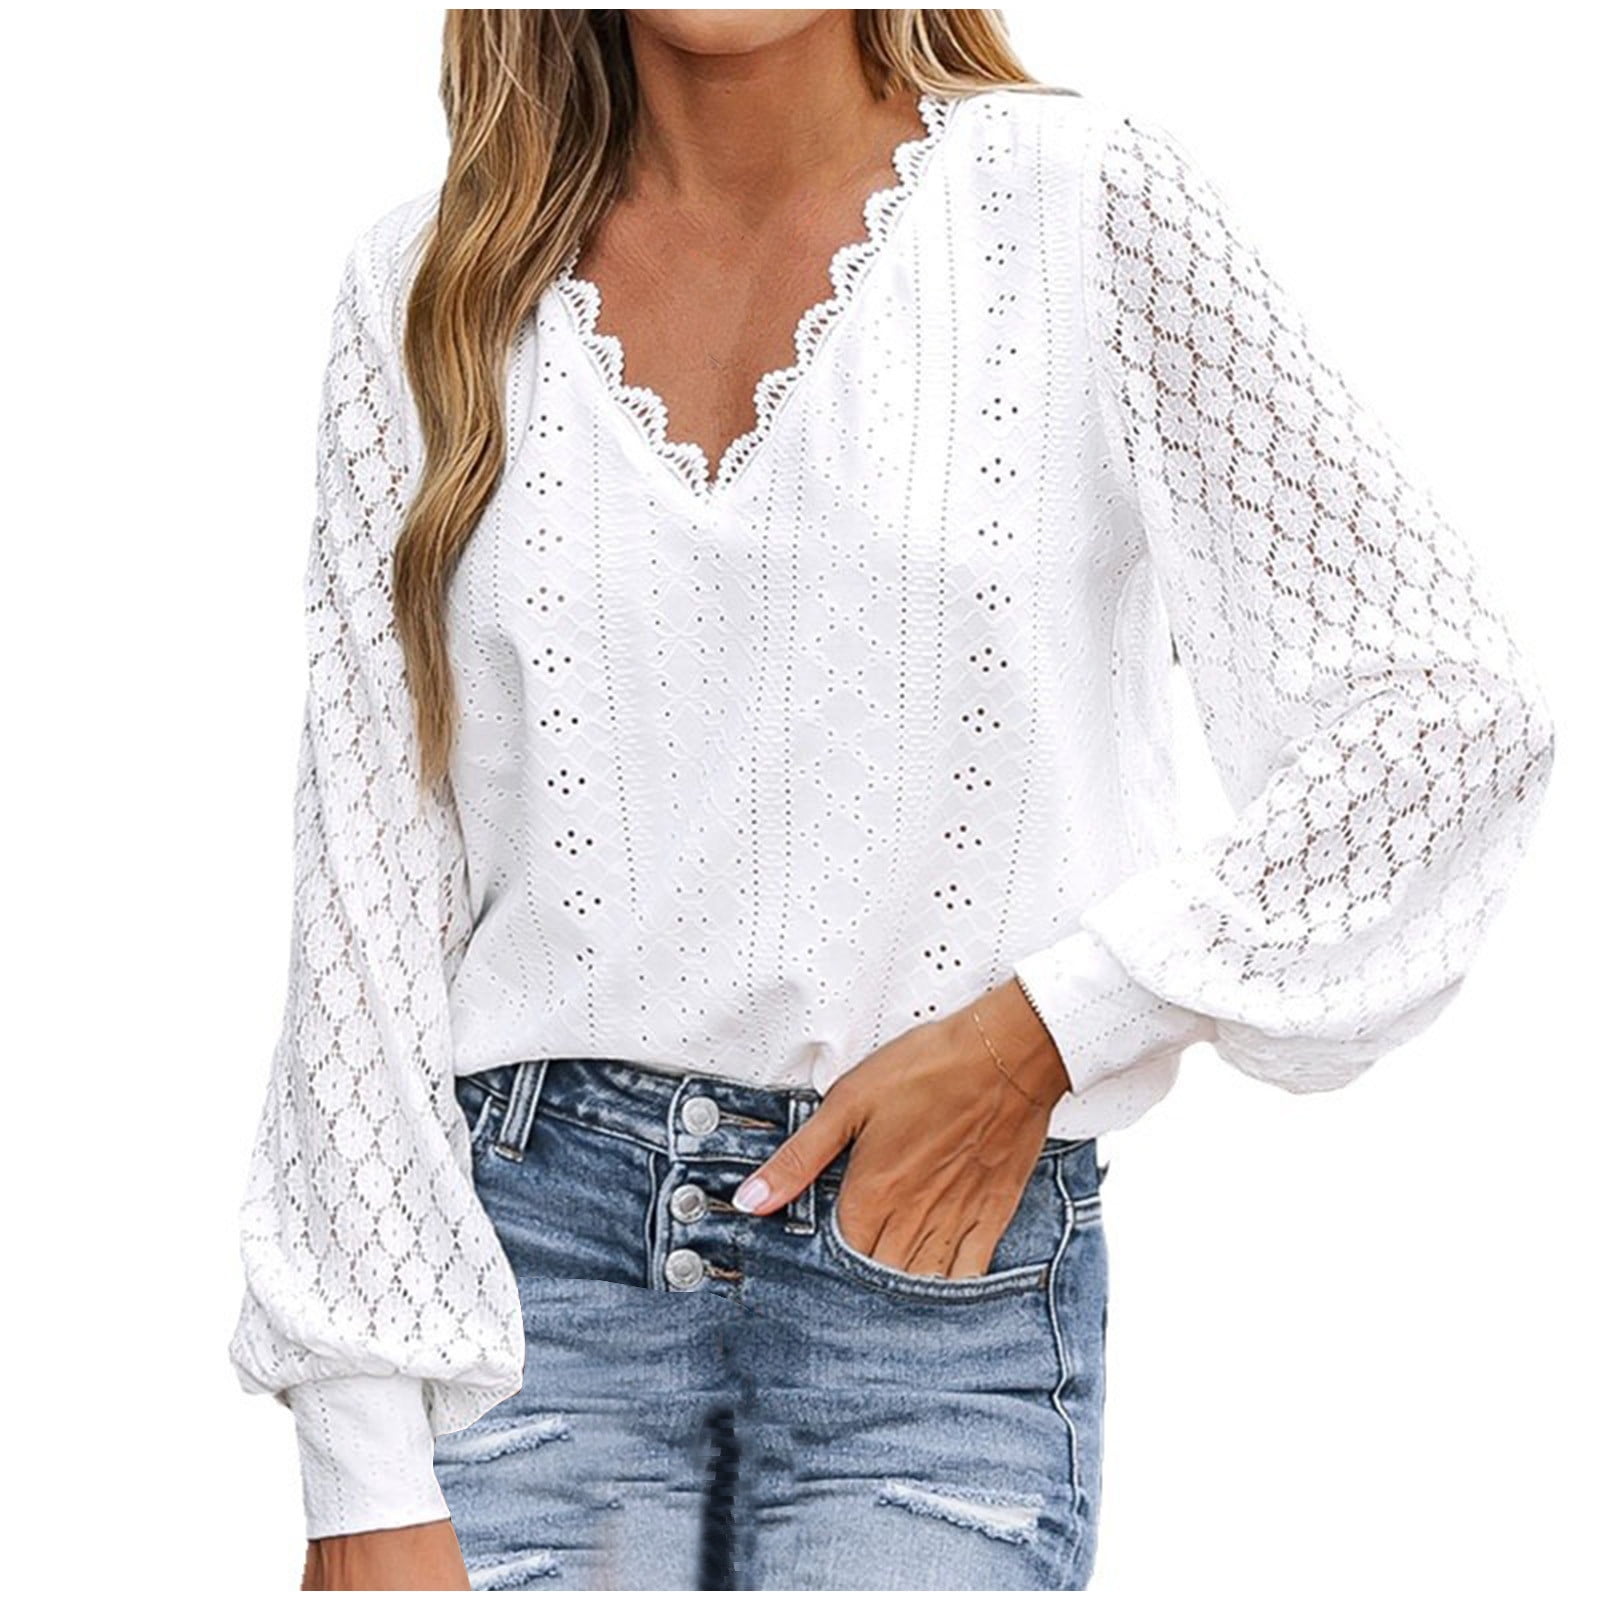 Diufon Blouse for Women Lace V-Neck Pullover Top Long Balloon Sleeve ...